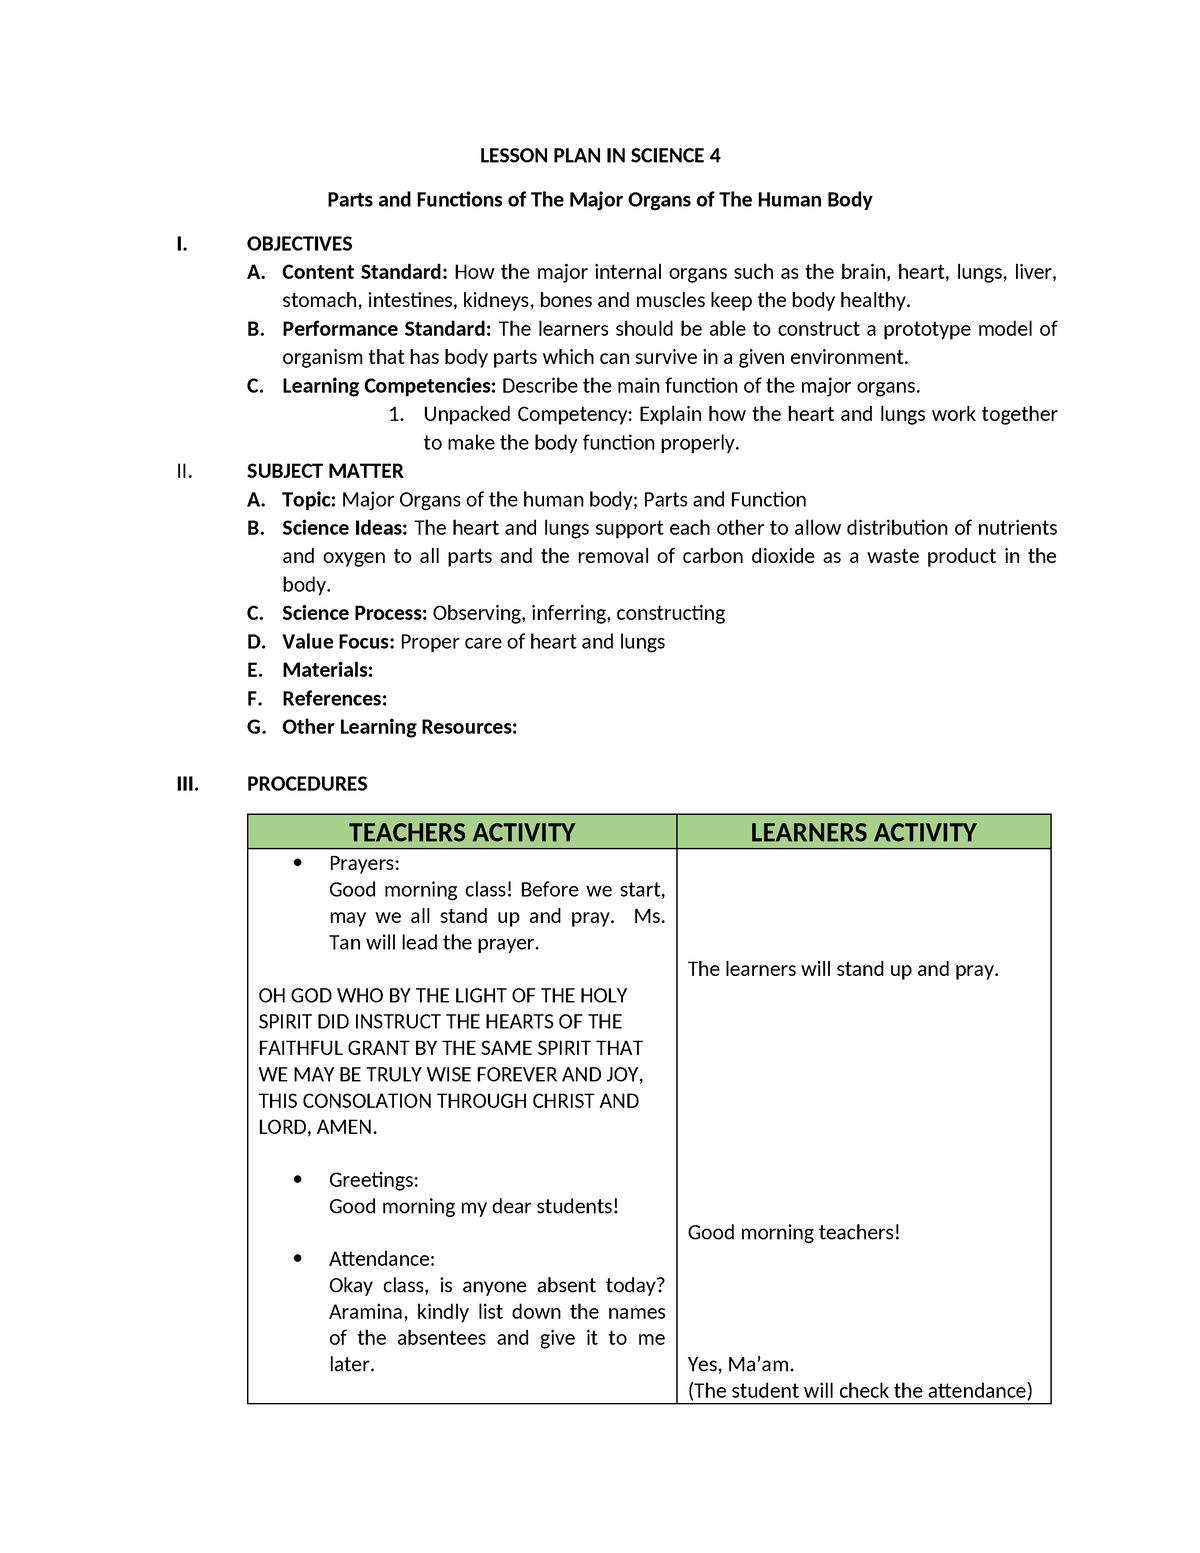 Lesson PLAN in science 1 - LESSON PLAN IN SCIENCE 4 Parts and Functions ...